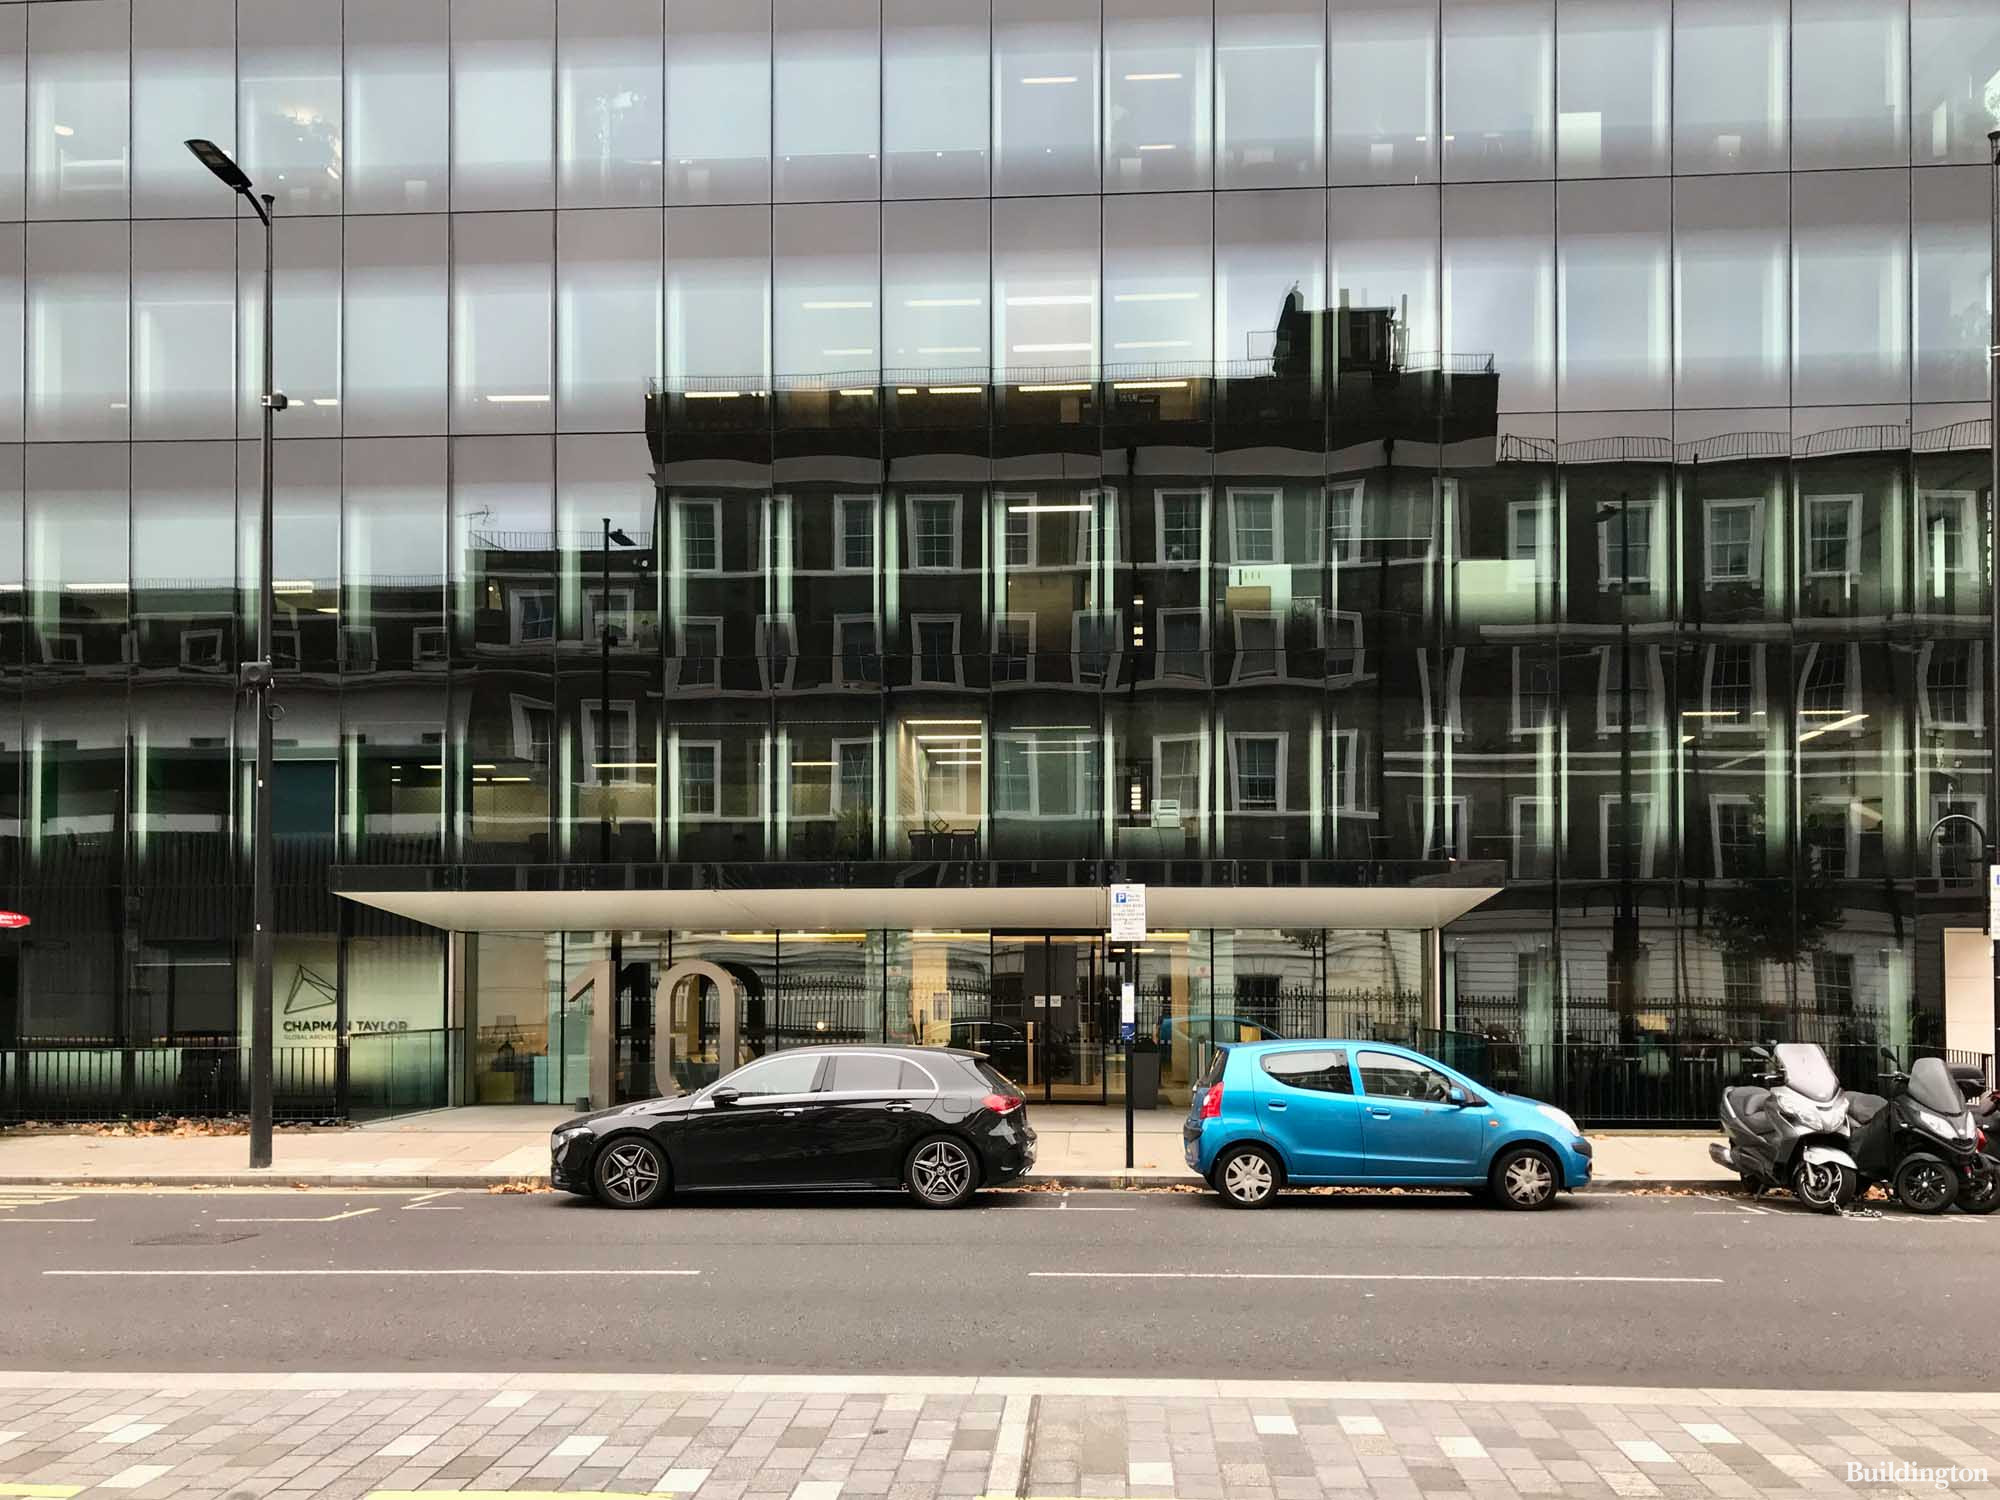 Main entrance to 10 Eastbourne Terrace office building.